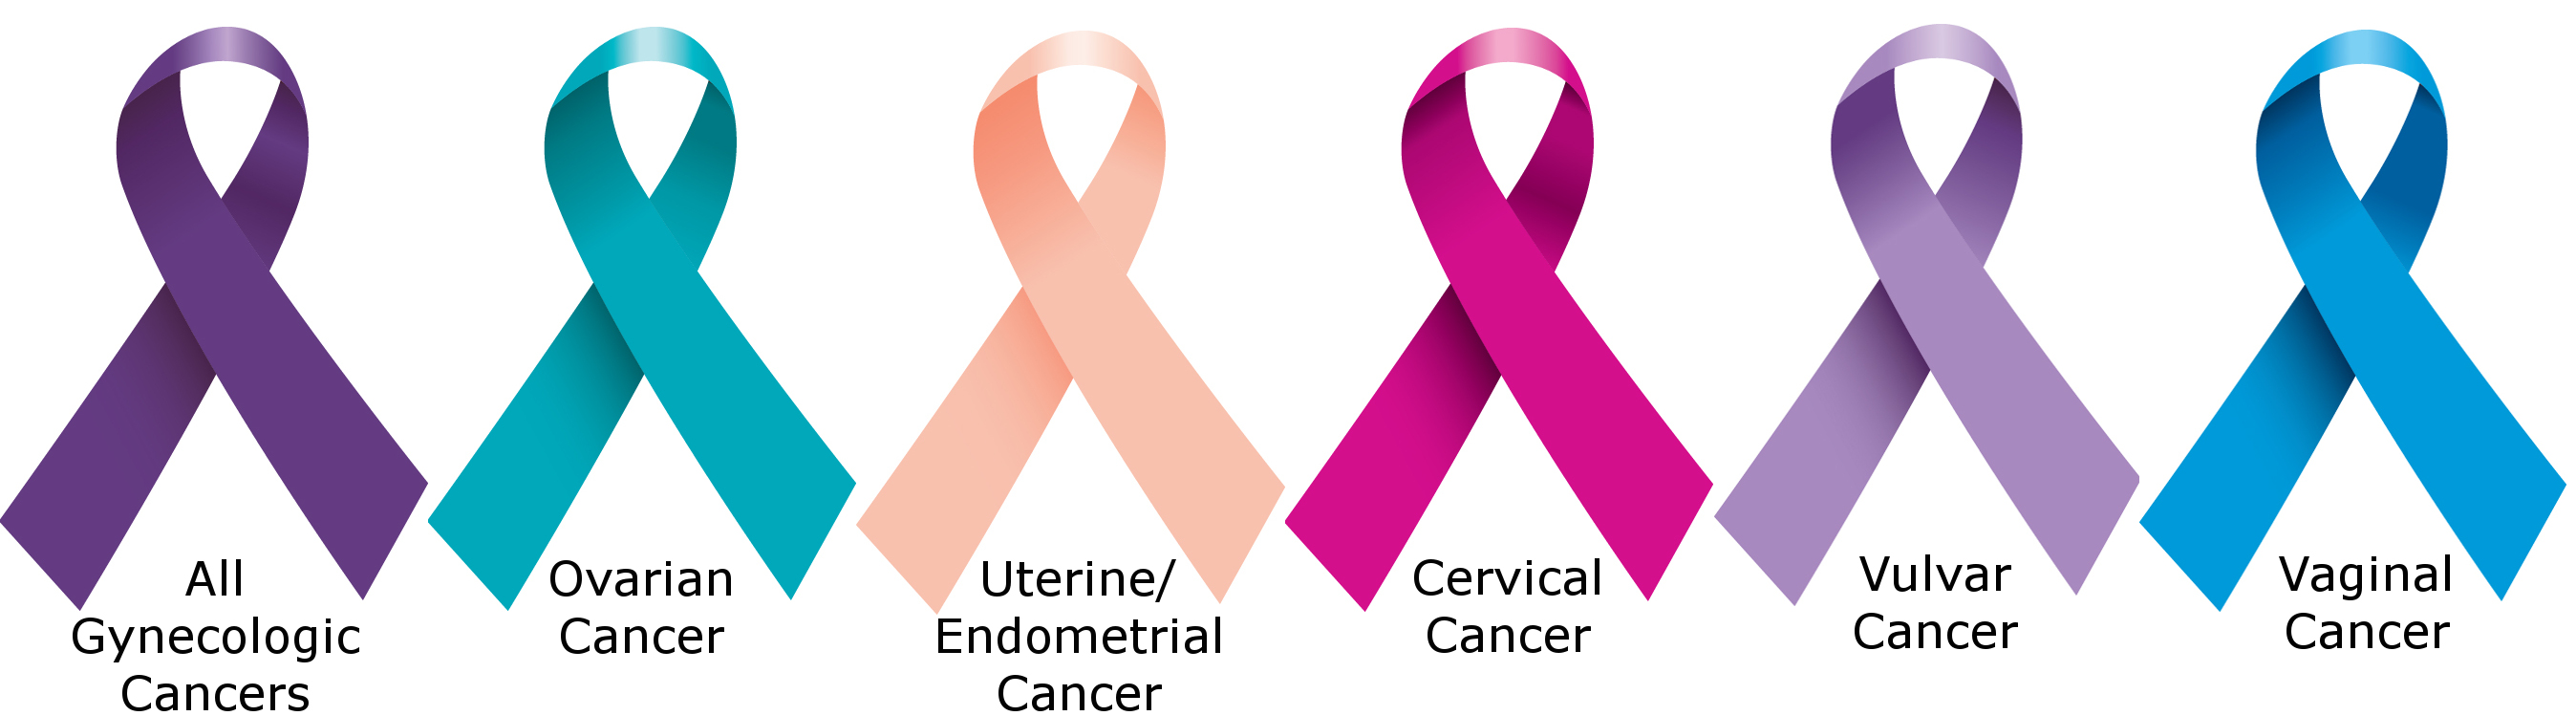 Types of Gynecologic Cancers - Foundation for Women